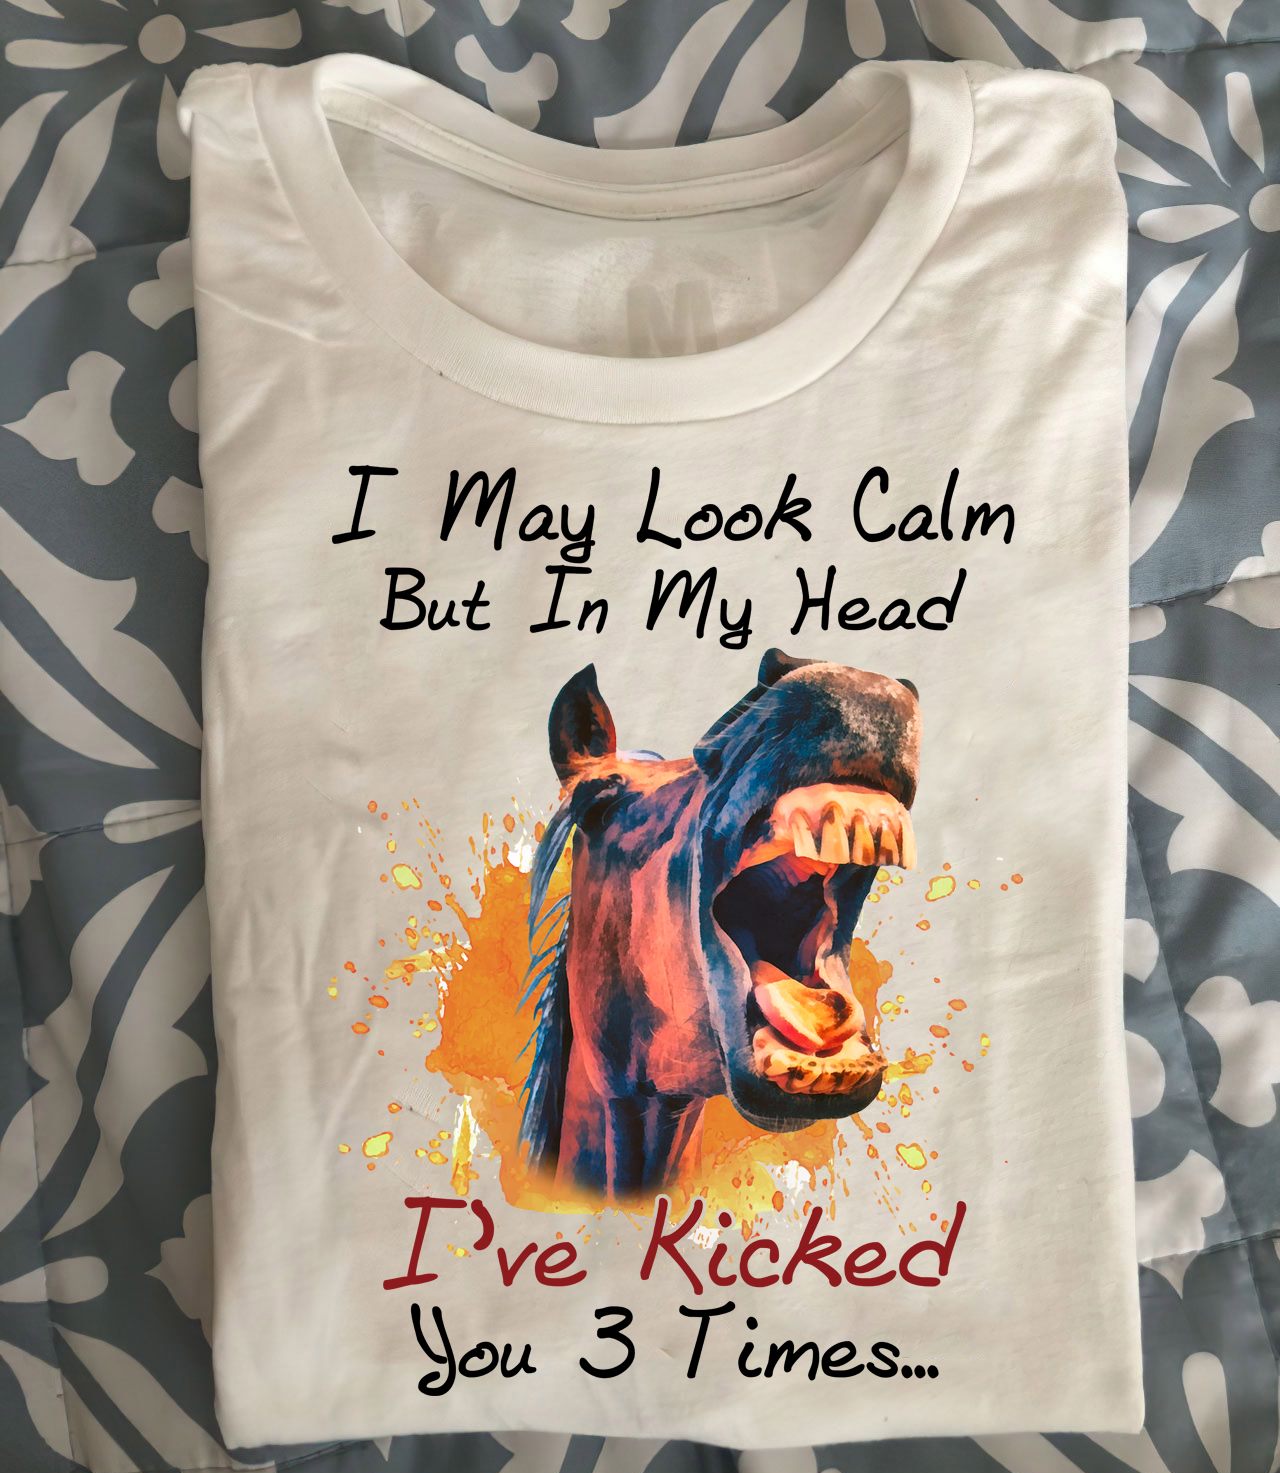 I may look calm but in my head I've kicked you 3 times - Grumpy horse